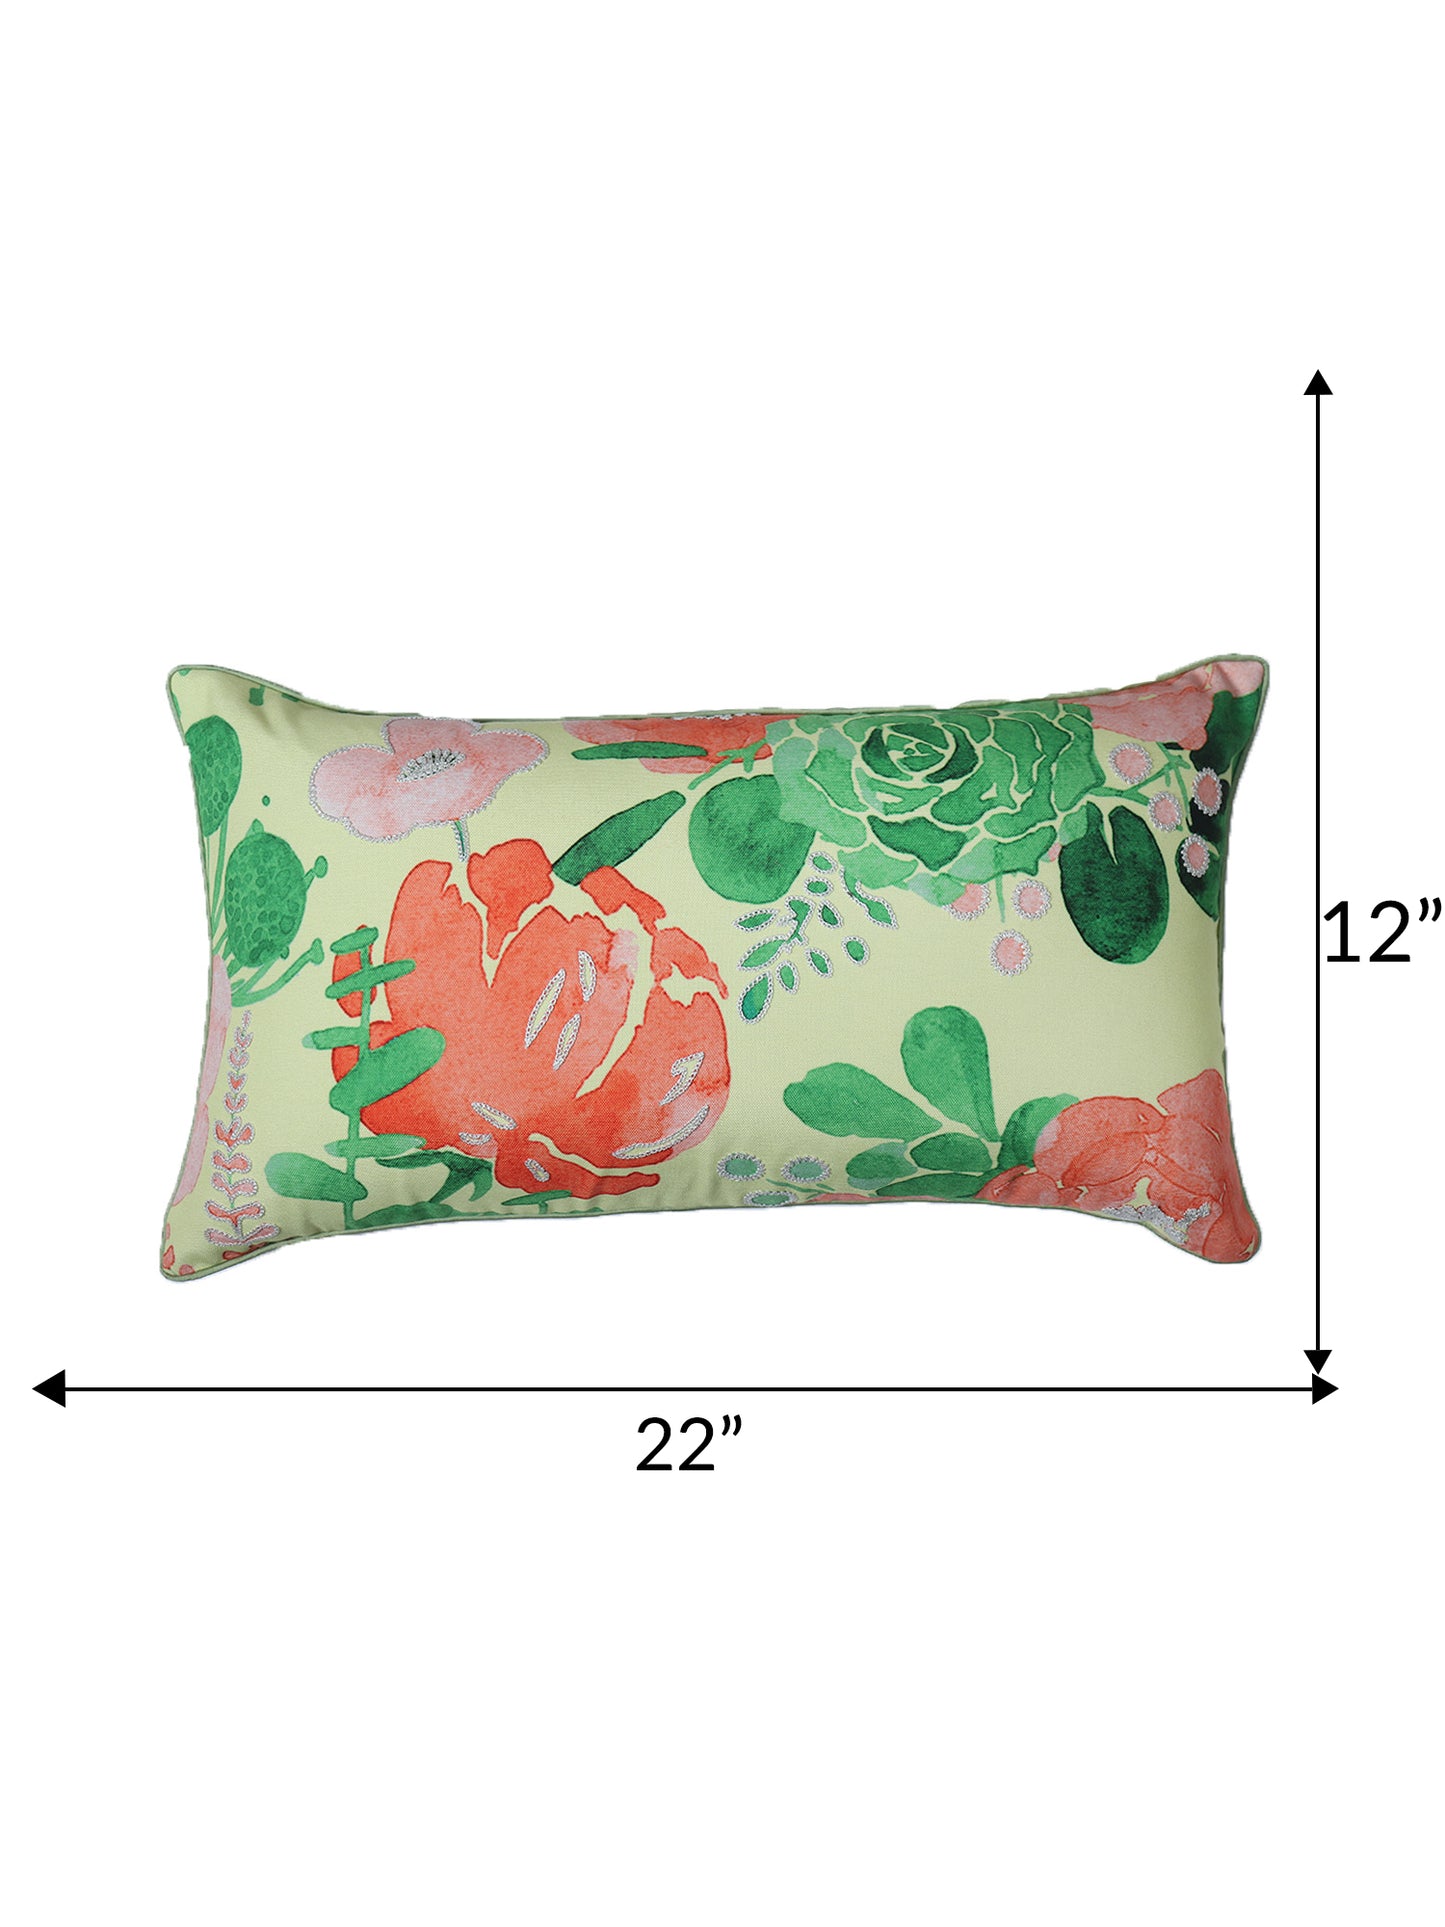 Cushion Cover for Sofa, Bed | Cotton Polyester| Floral Design | Hand Embroidery with Cord Piping | Multicolor - 12x22in(30x56cm) (Pack of 1)